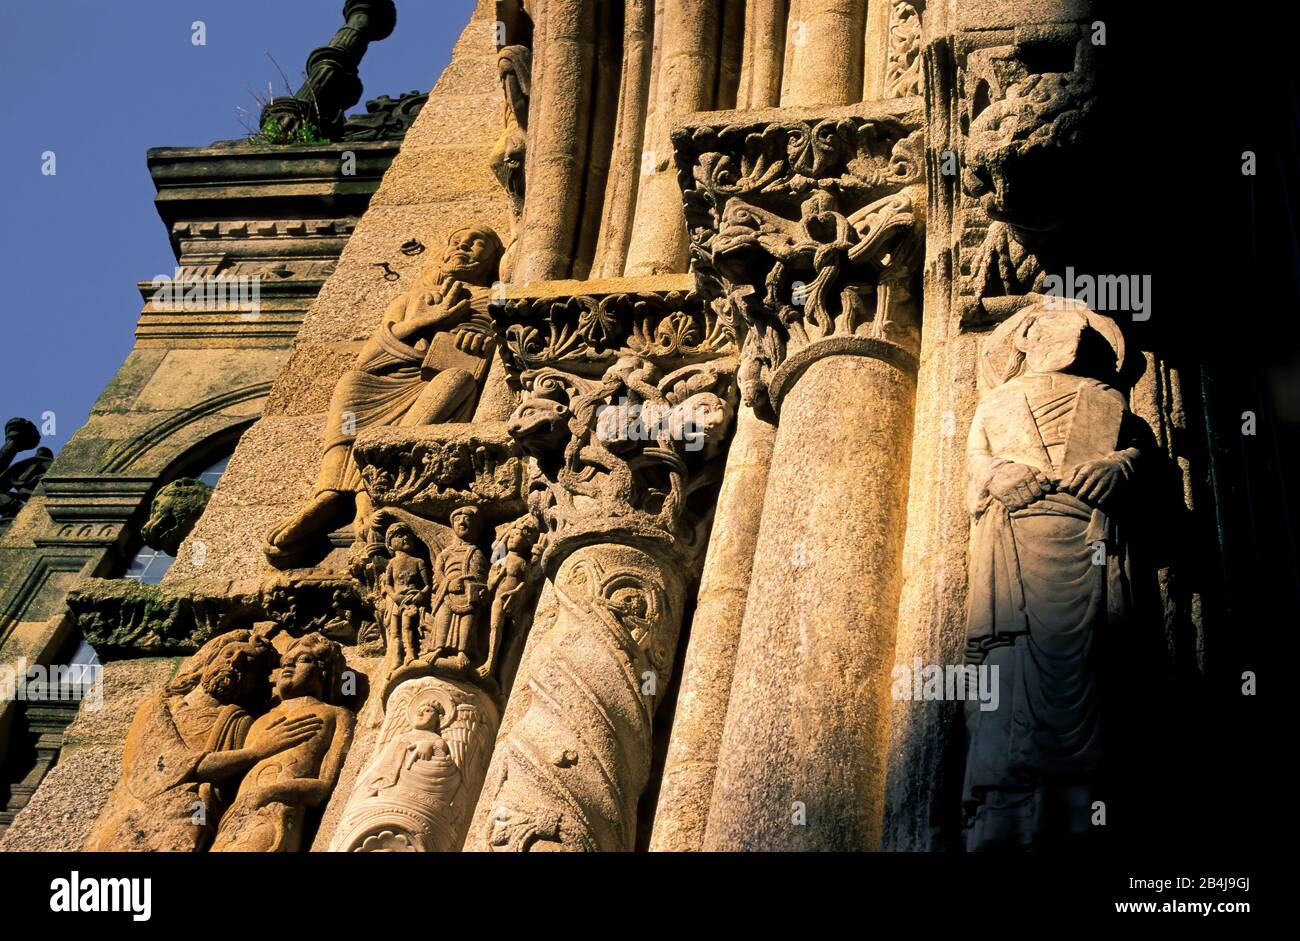 Detail of the South Front from the Cathedral of Santiago, Compostela, (Coruna) Spain, Stock Photo